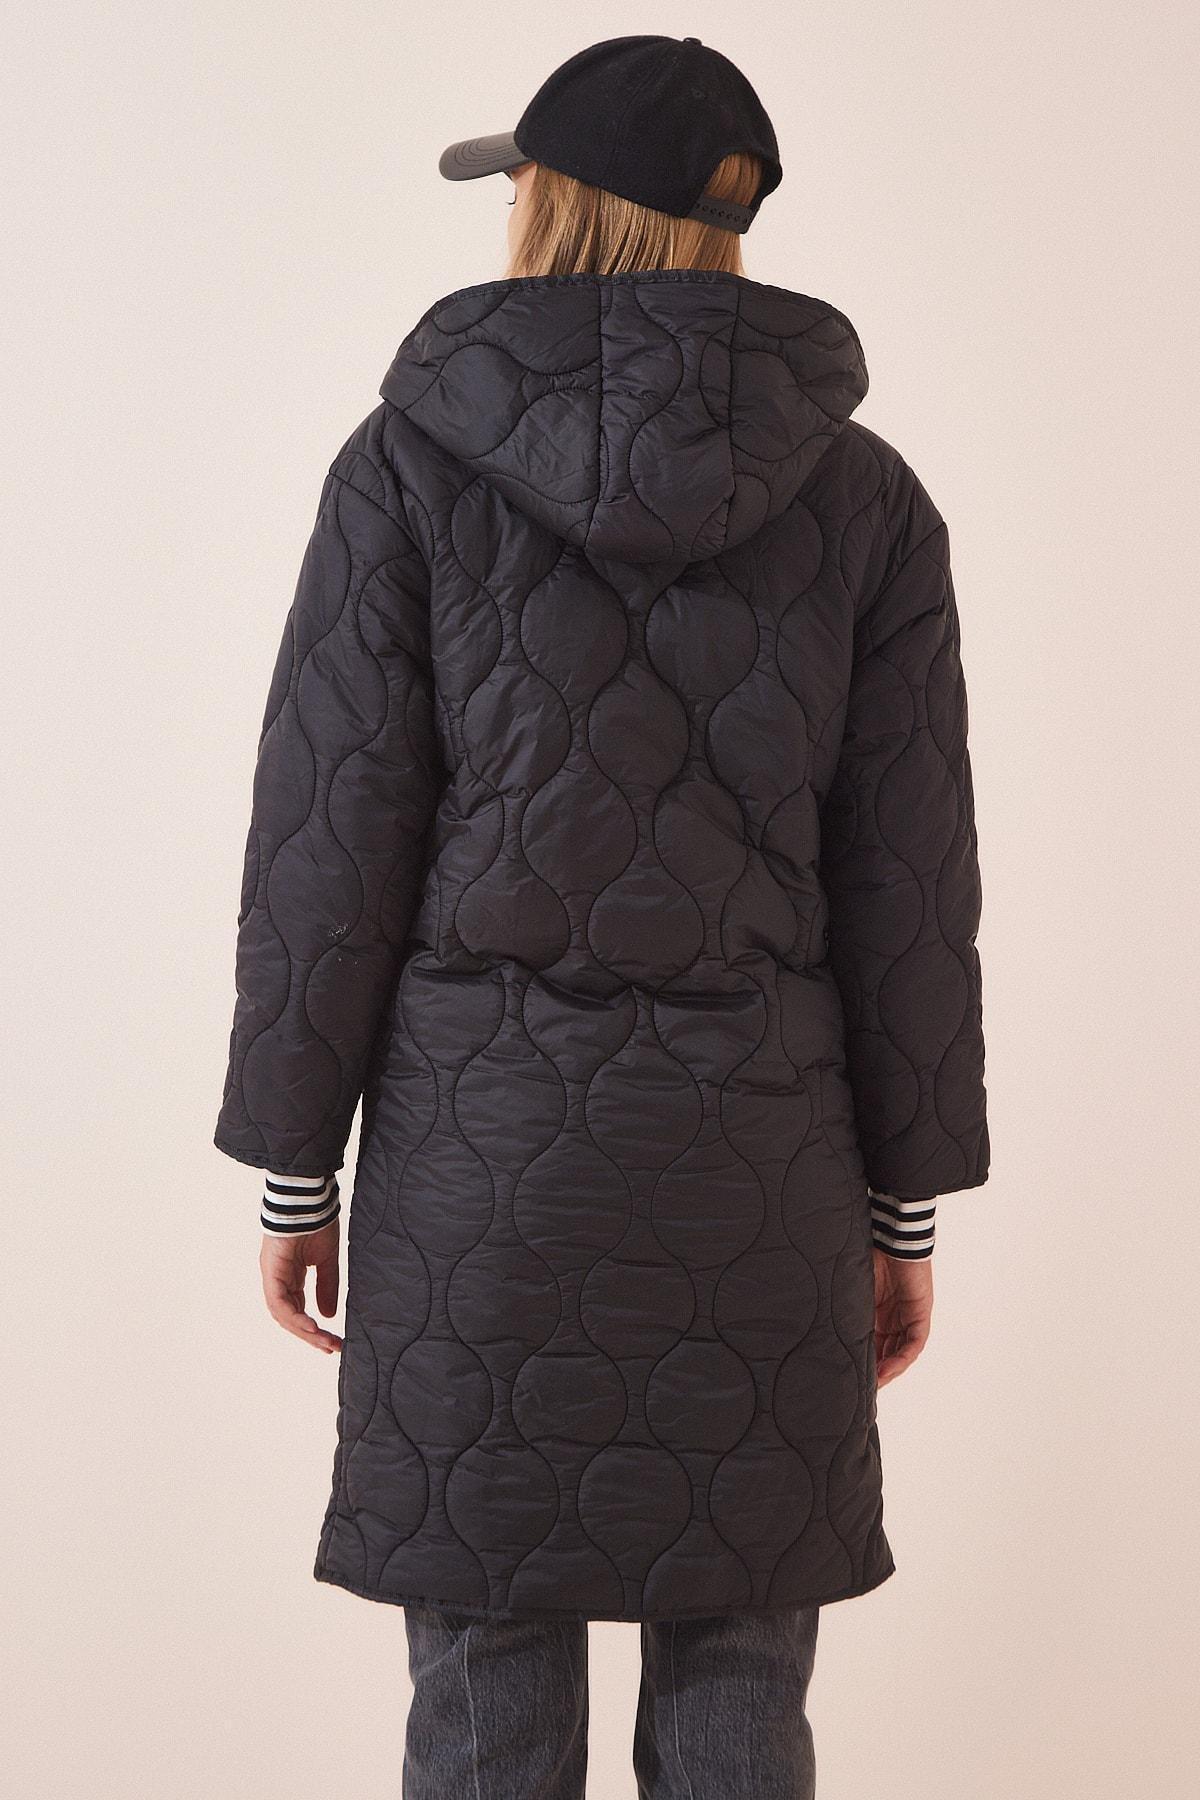 Happiness Istanbul - Black Hooded Quilted Coat